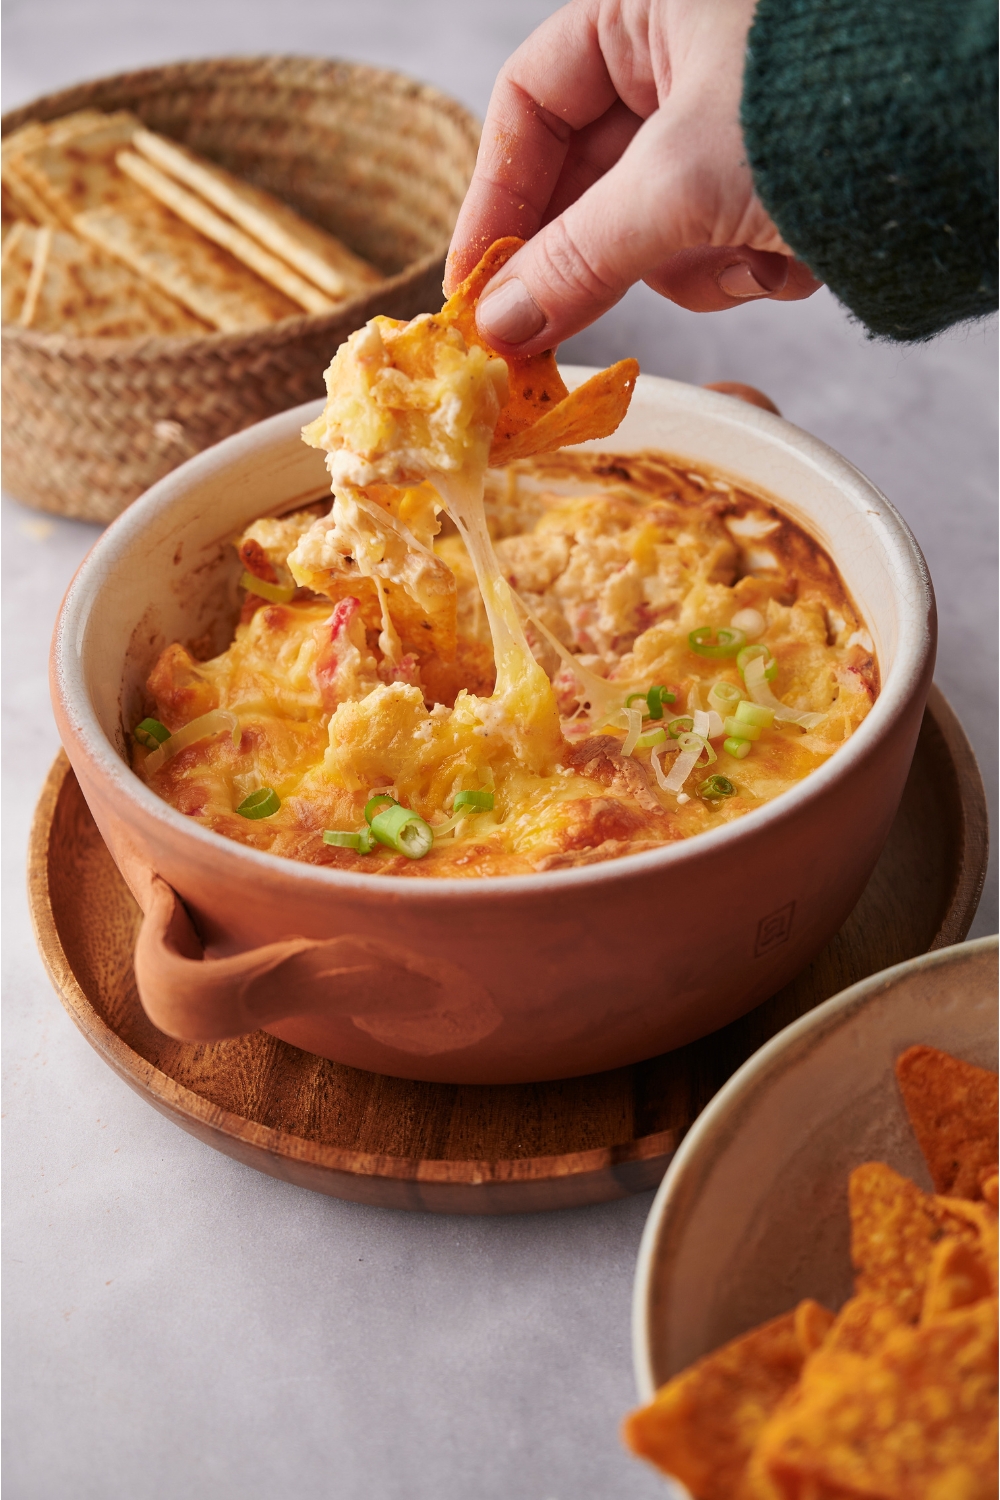 Hand scooping cheesy crab dip out of a baking dish with a tortilla chip.